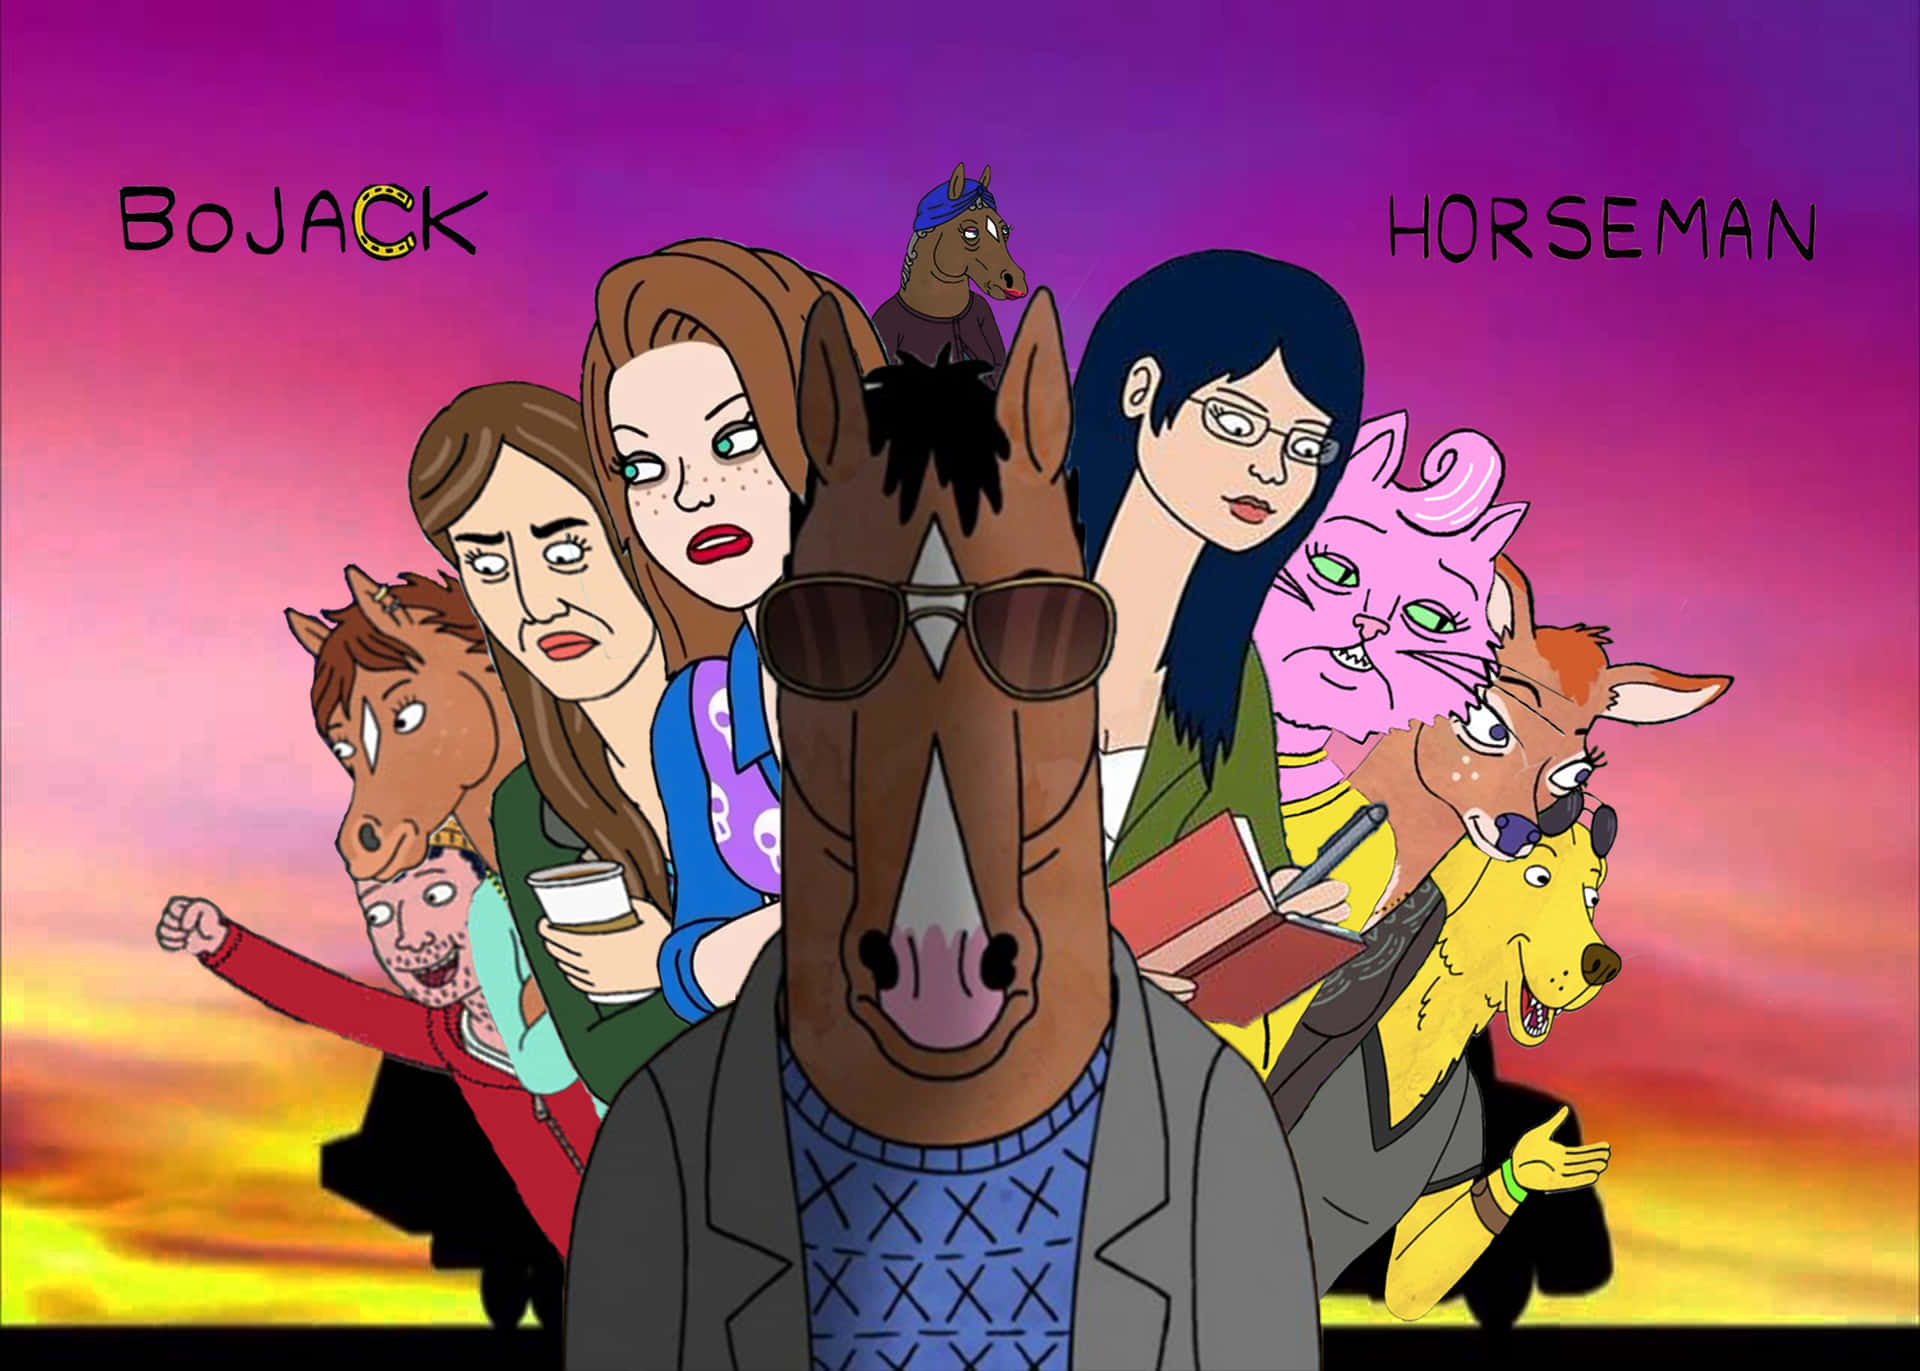 Bojack Horseman, the insecure but resilient protagonist of the adult animated Netflix series